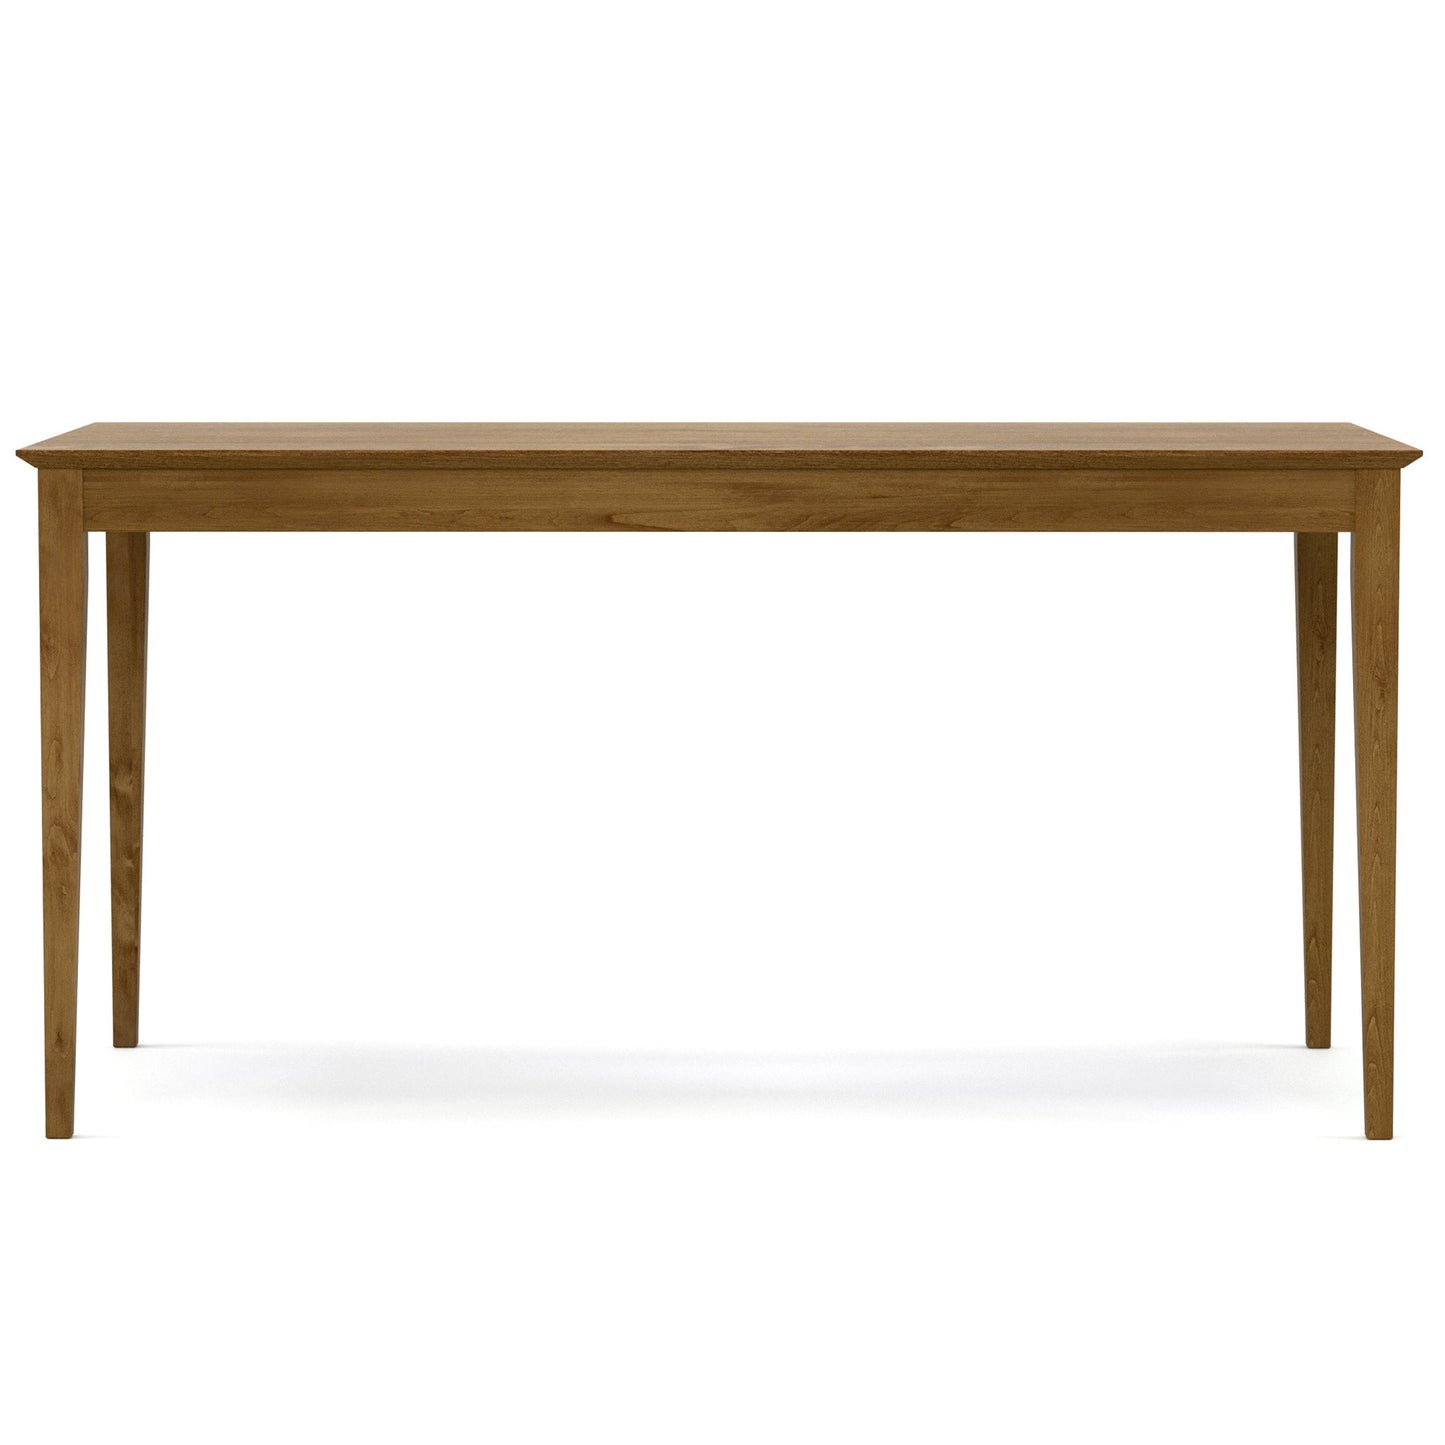 Gable Road 60-inch Desk Table